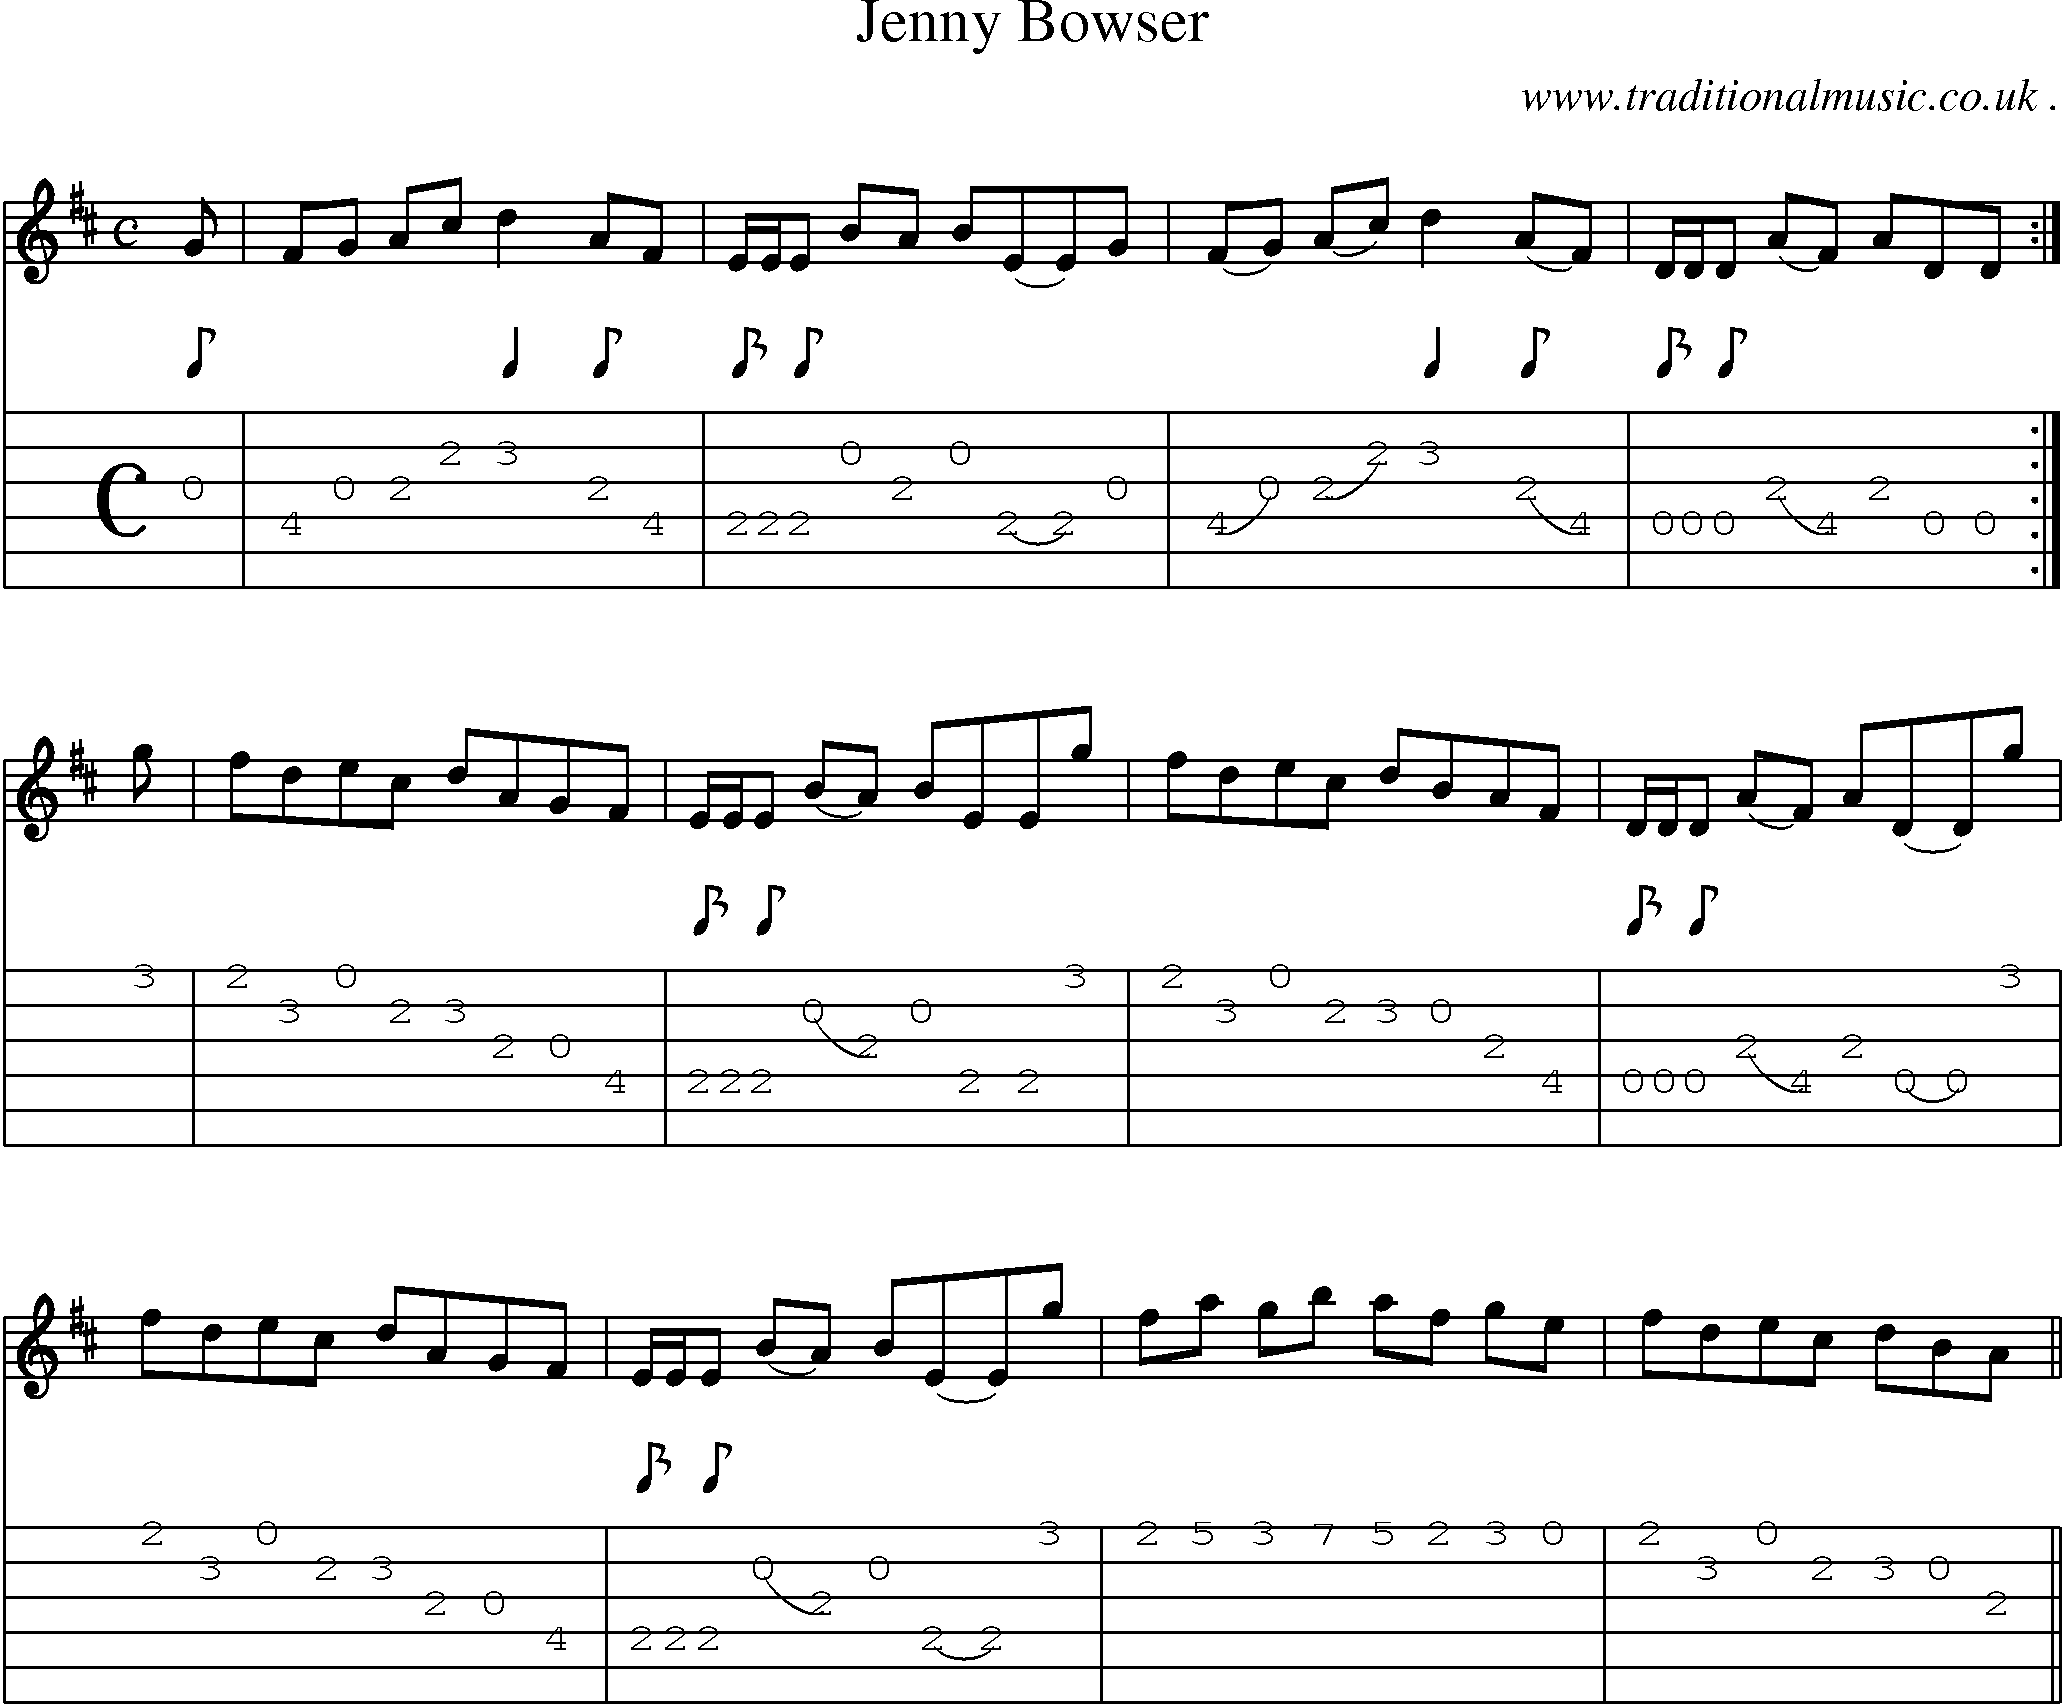 Sheet-music  score, Chords and Guitar Tabs for Jenny Bowser